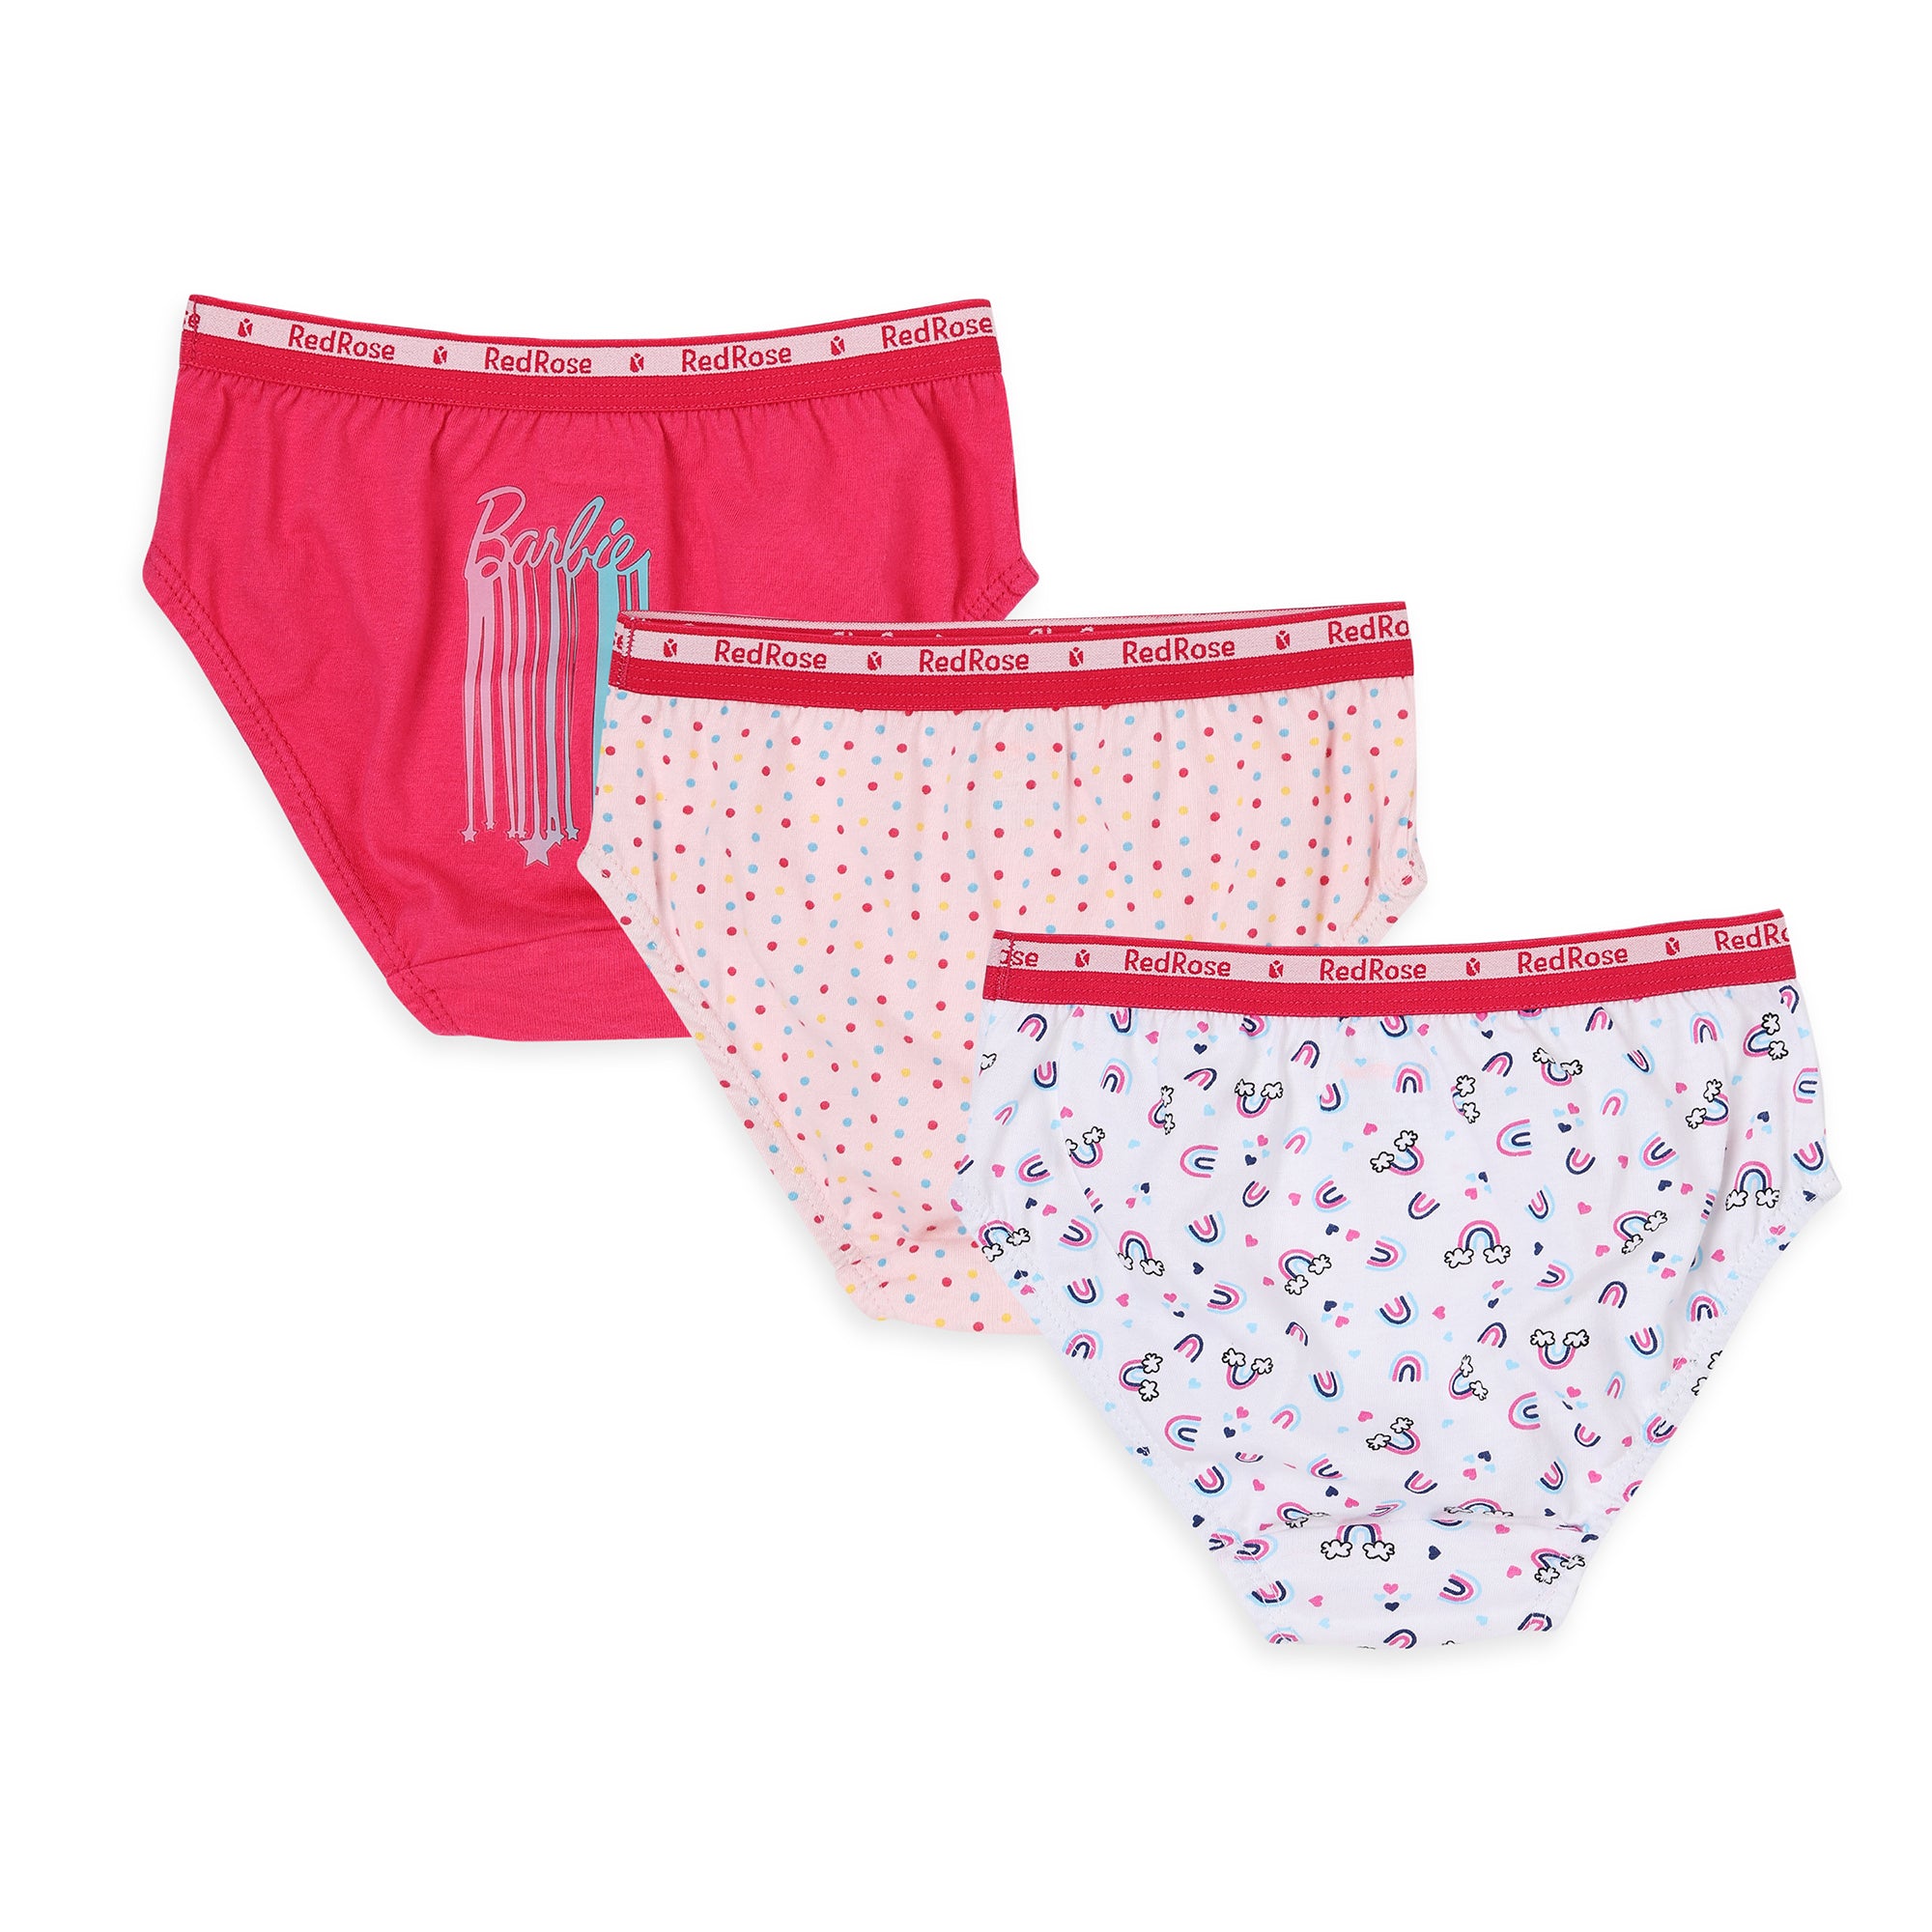 Buy Red Rose Panty 129-60 Barbie 3 Pcs Online at Low Prices in India at